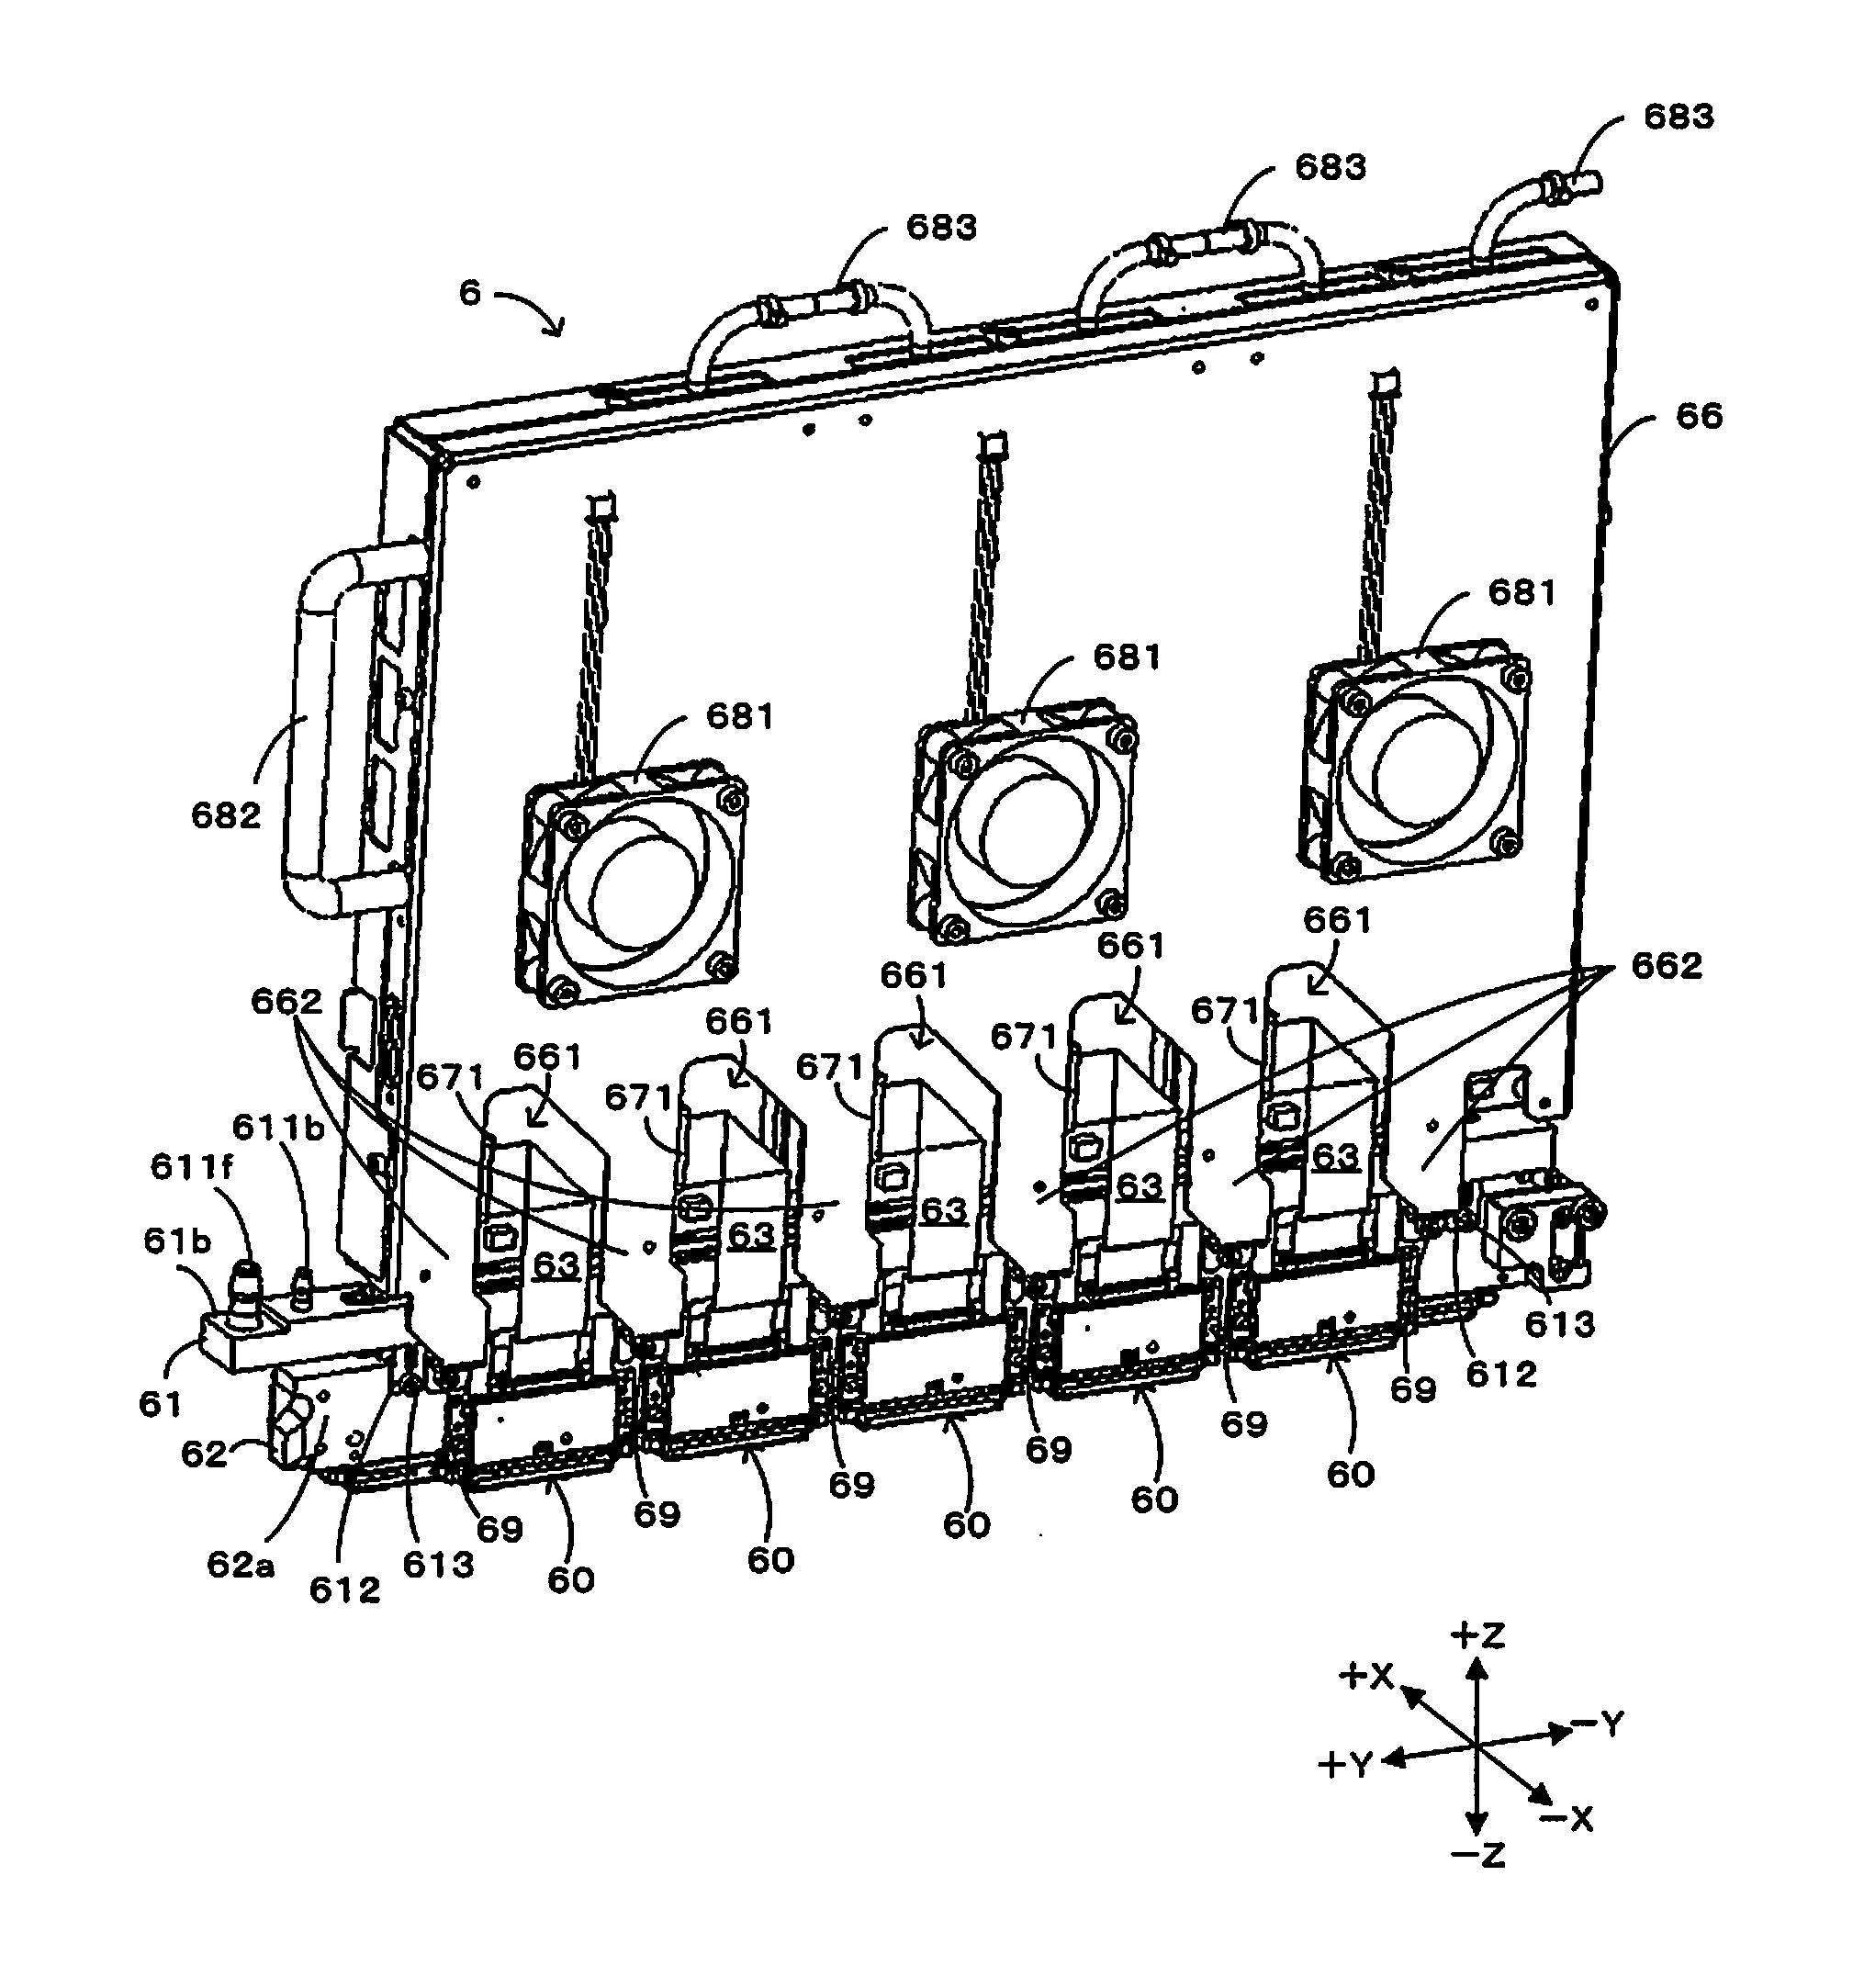 Head unit and image recording device